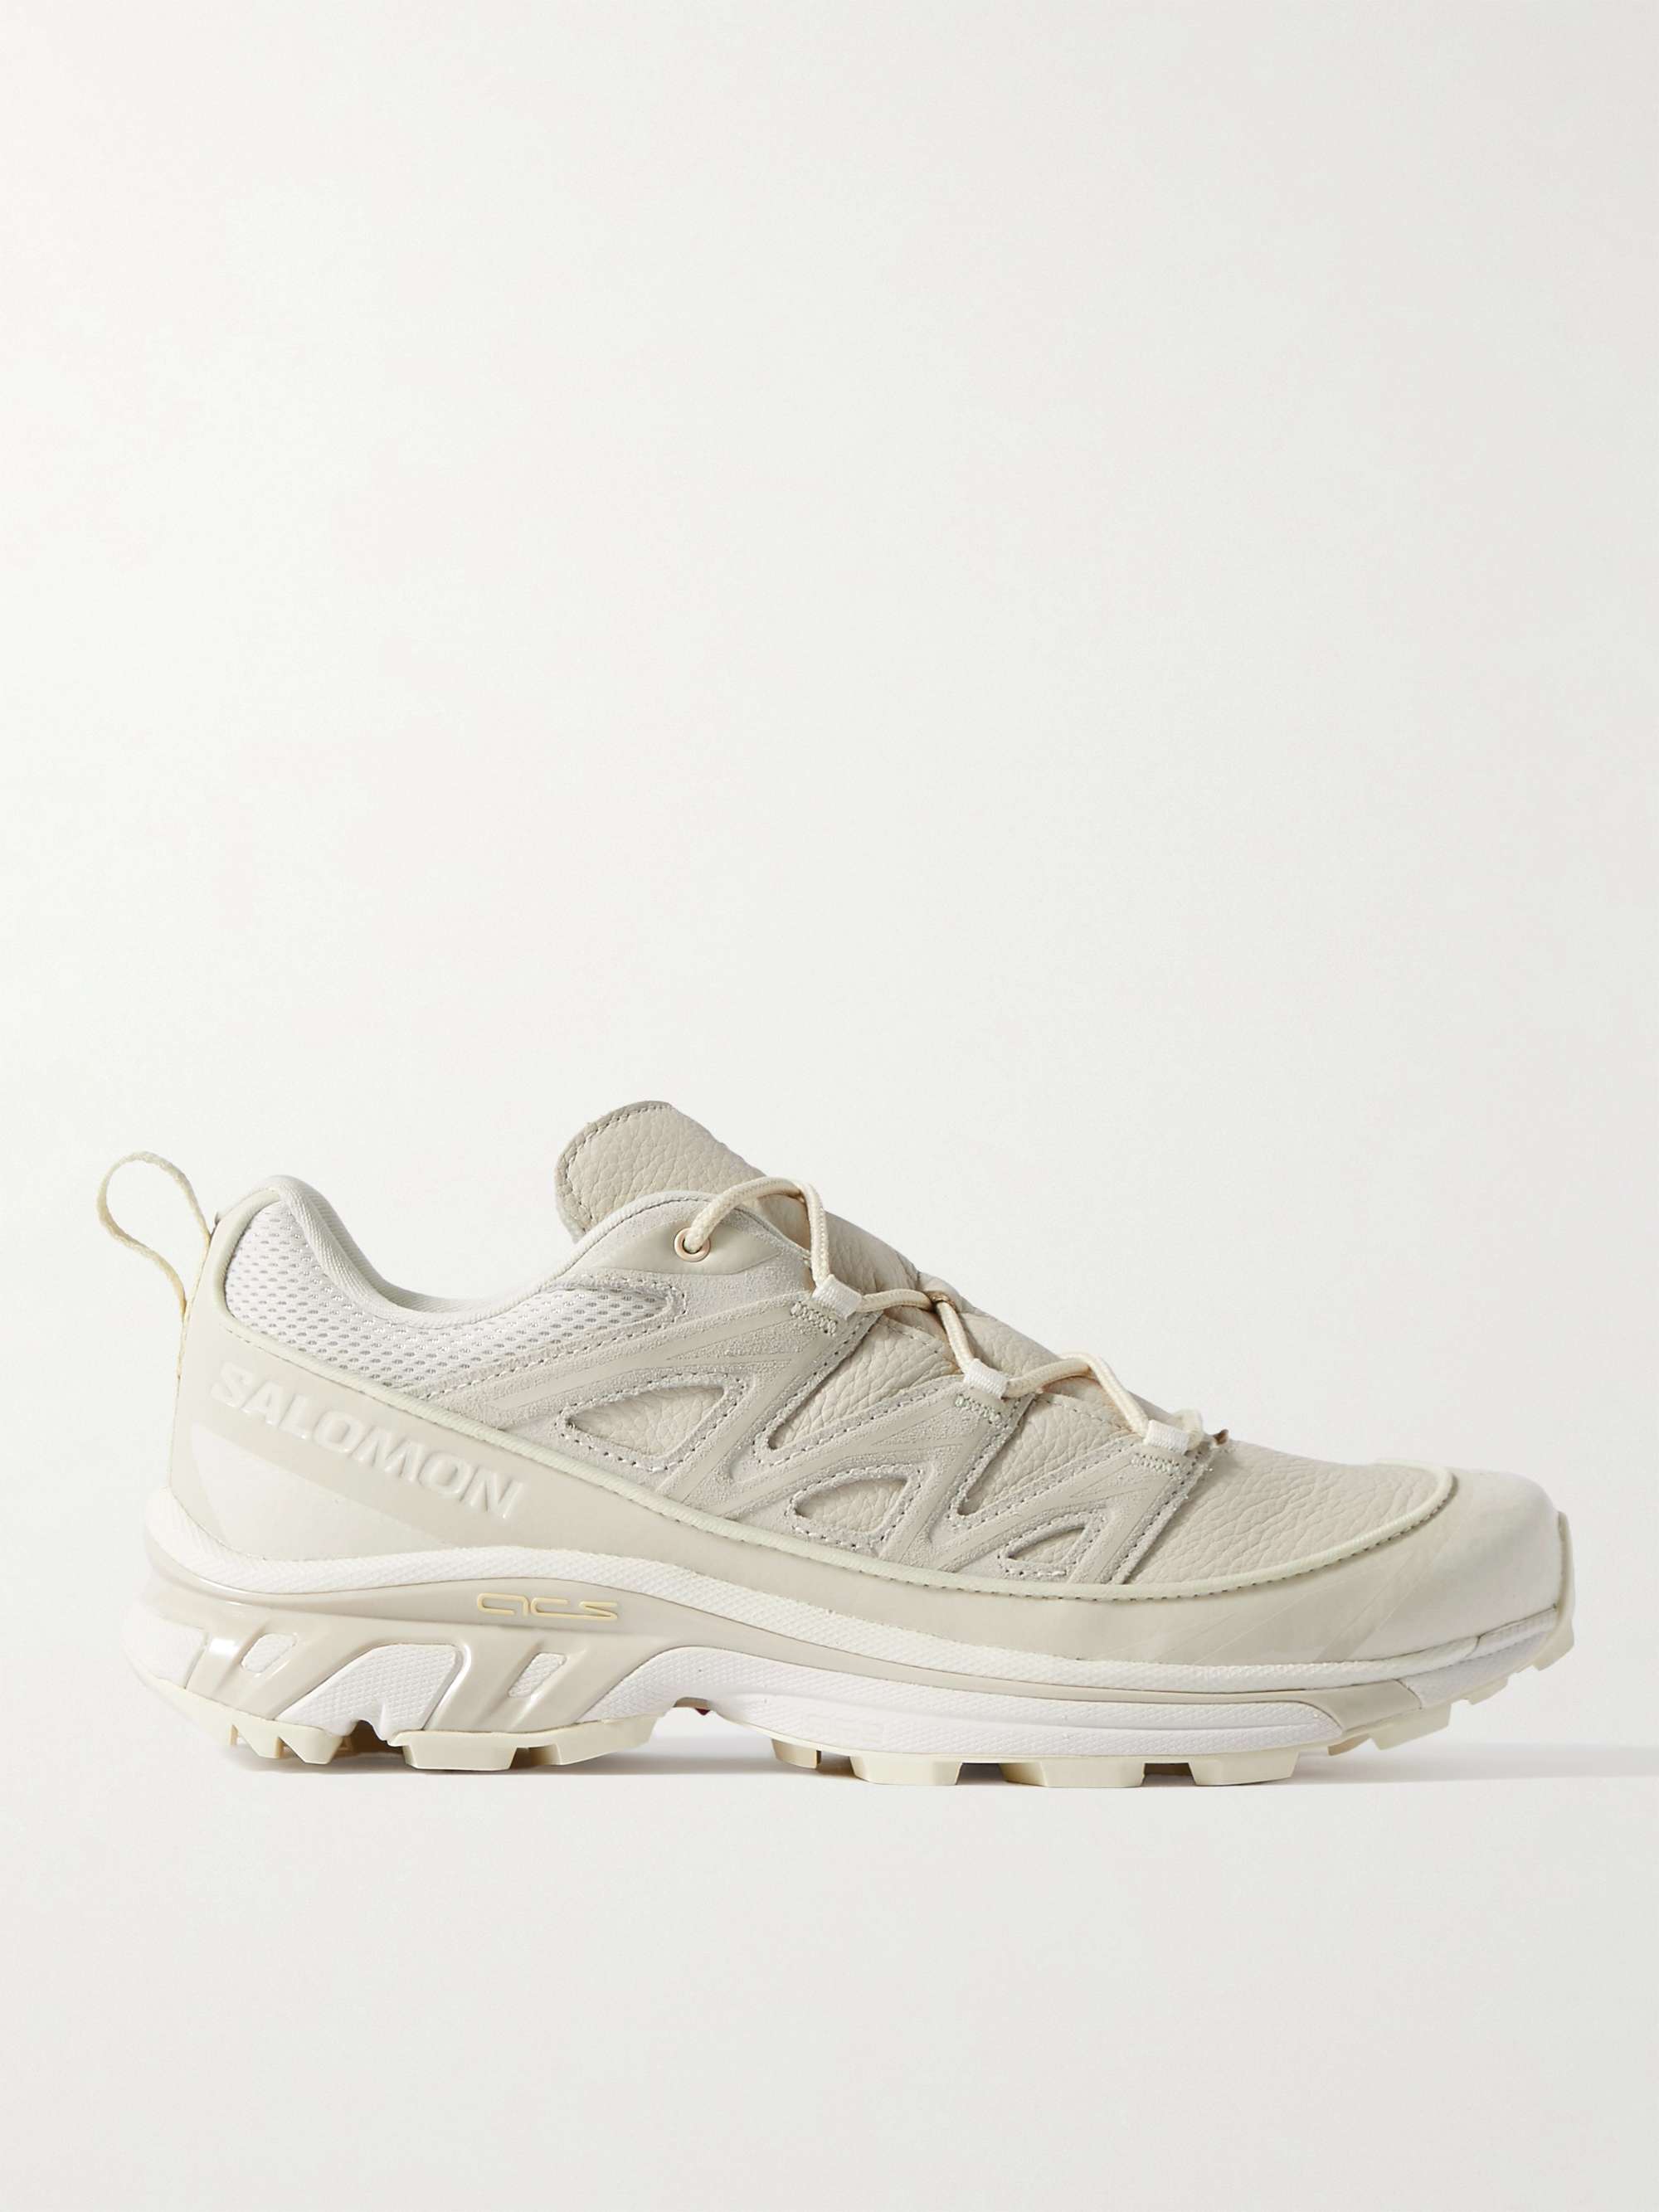 XT-6 Expanse LTR Mesh-Trimmed Suede and Leather Sneakers